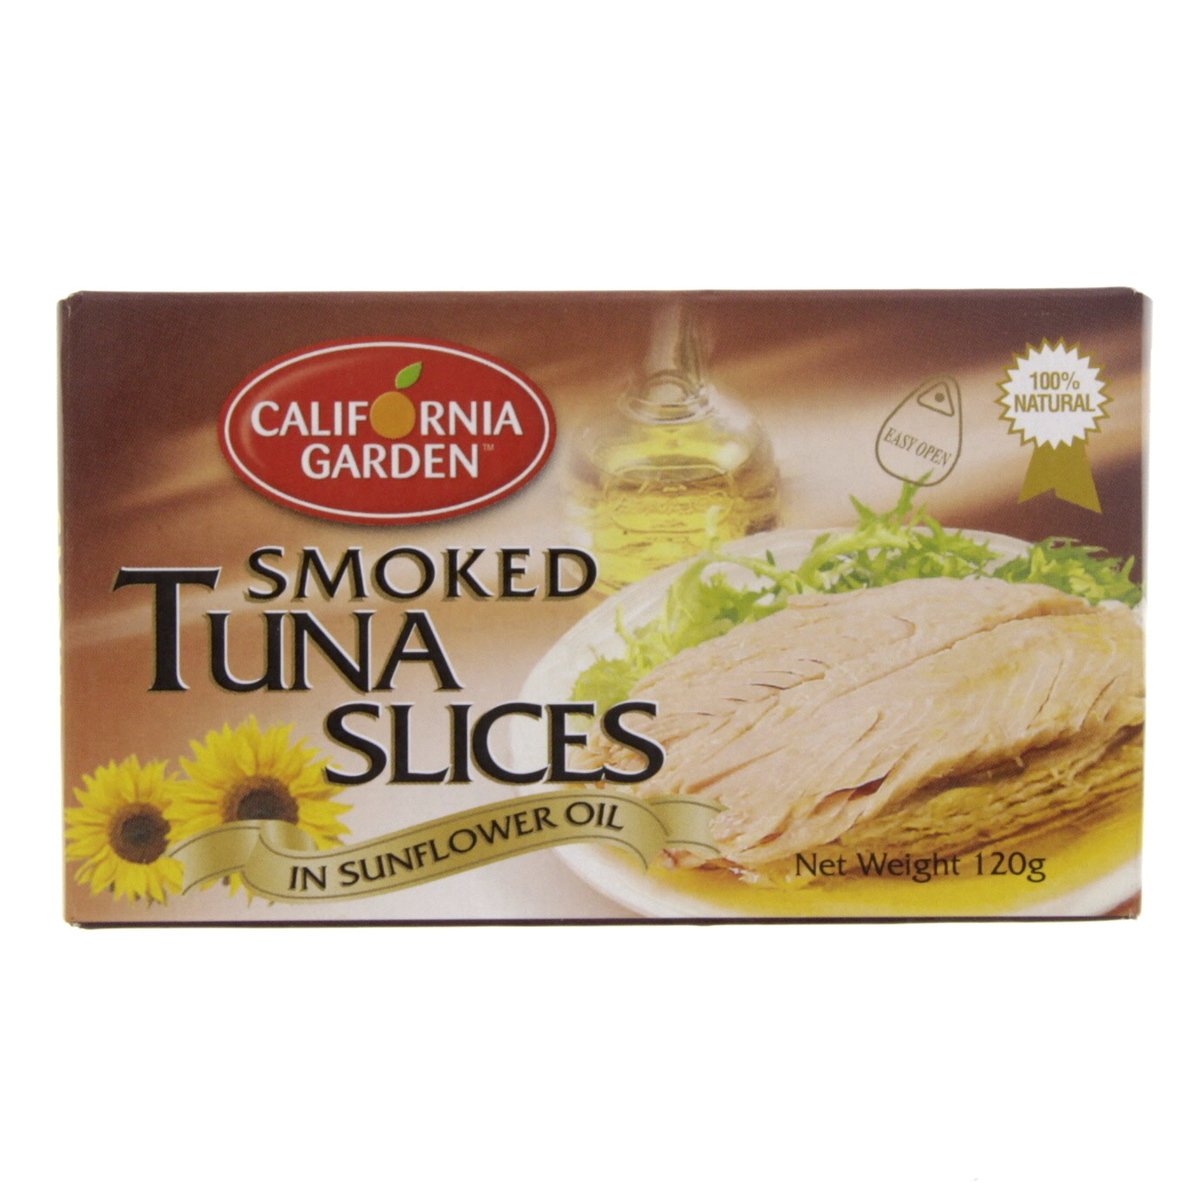 California Garden Canned Smoked Tuna Slices In Sunflower Oil 120 g